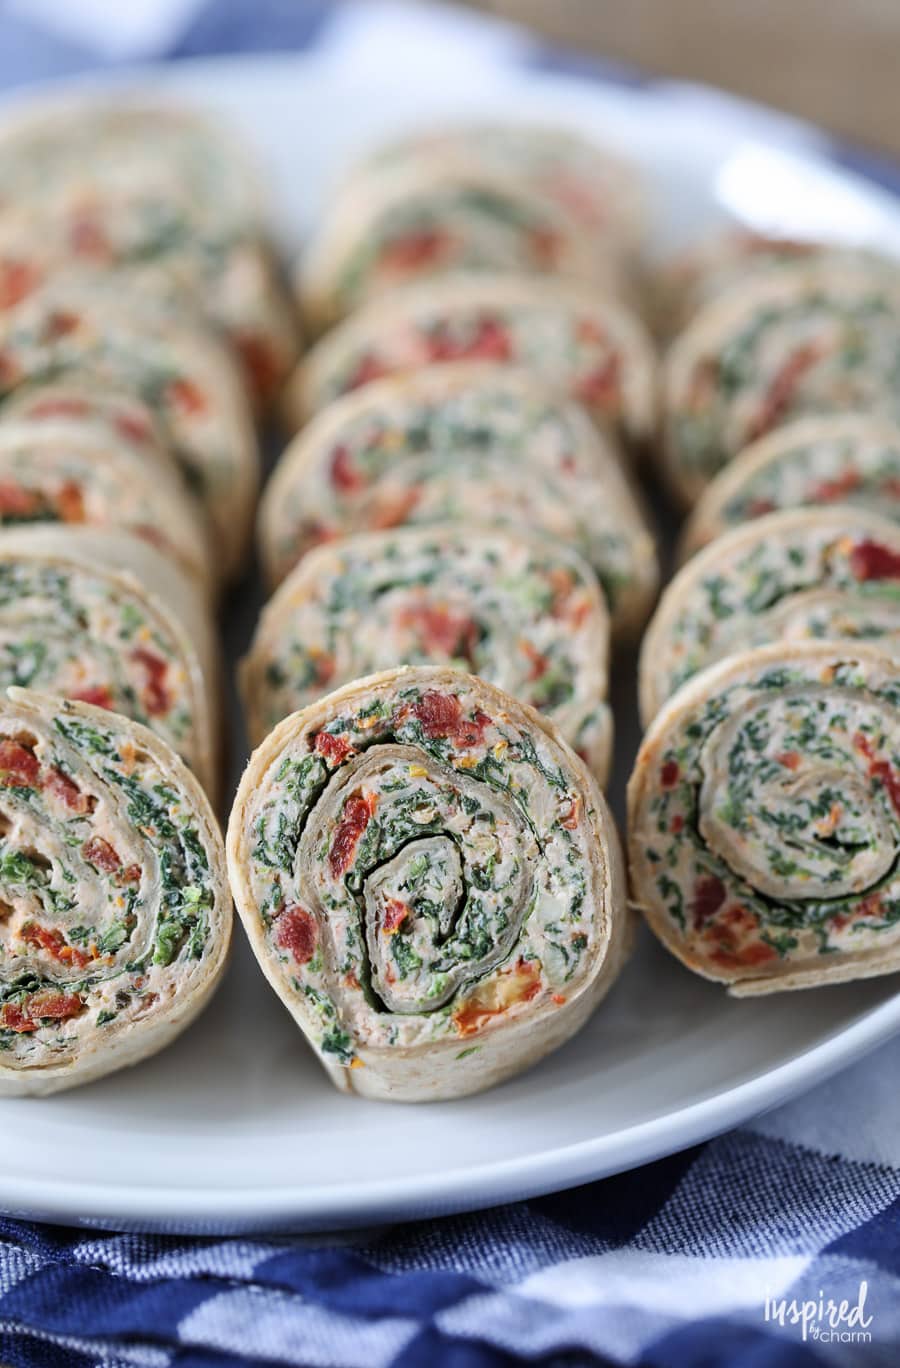 Sun-Dried Tomato Basil Roll-Ups - quick and tasty appetizer recipe